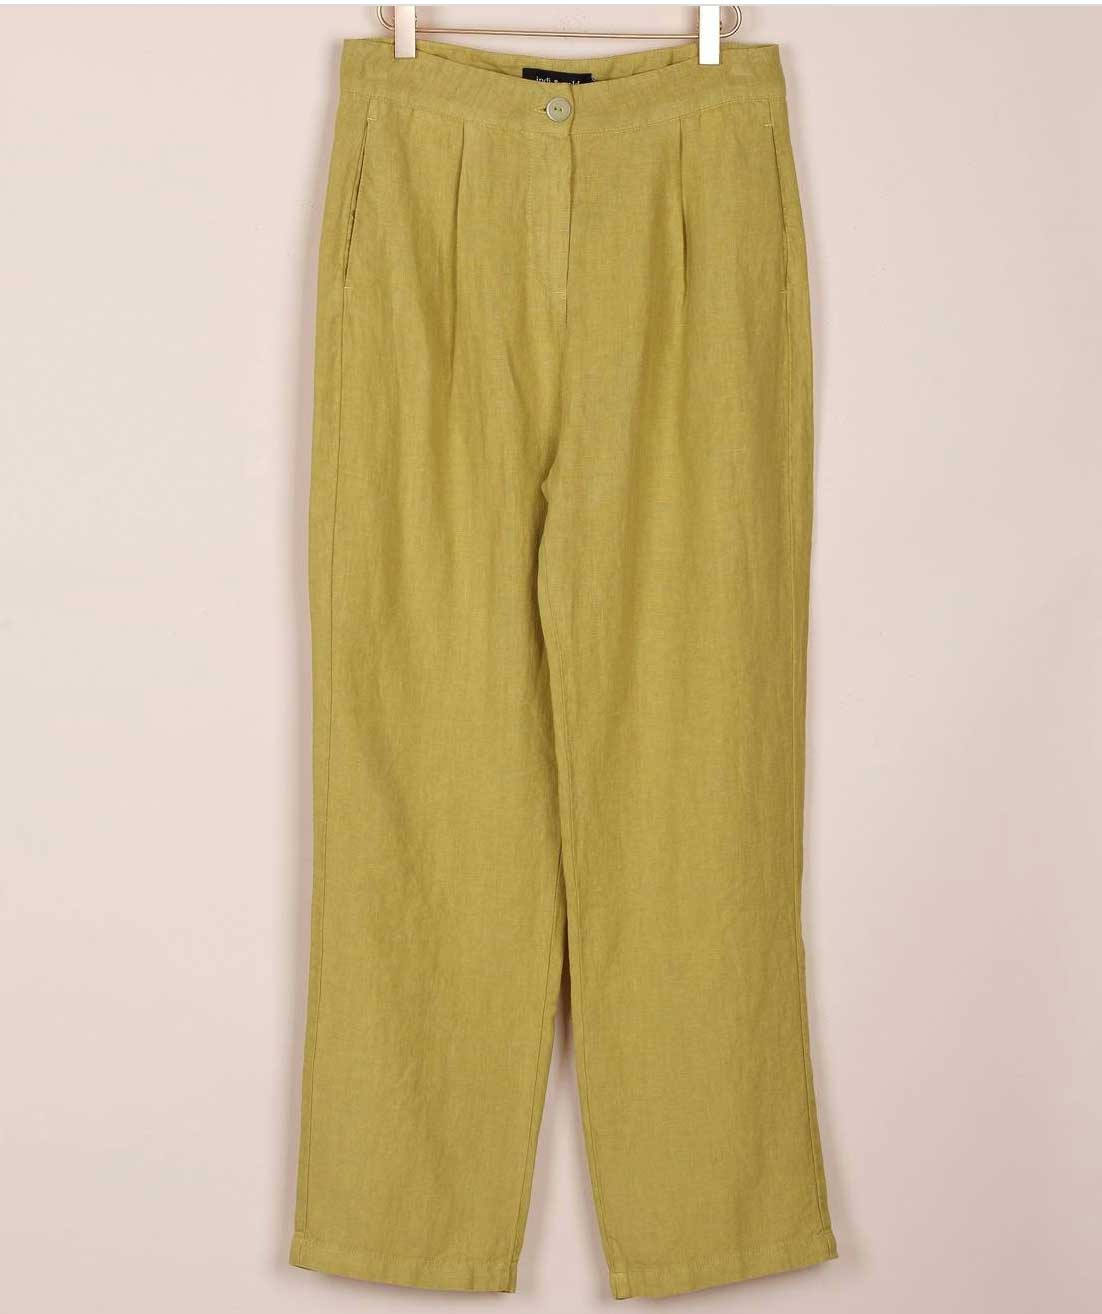 Indi & Cold Pistachio Linen Trousers - Willow Shaftesbury